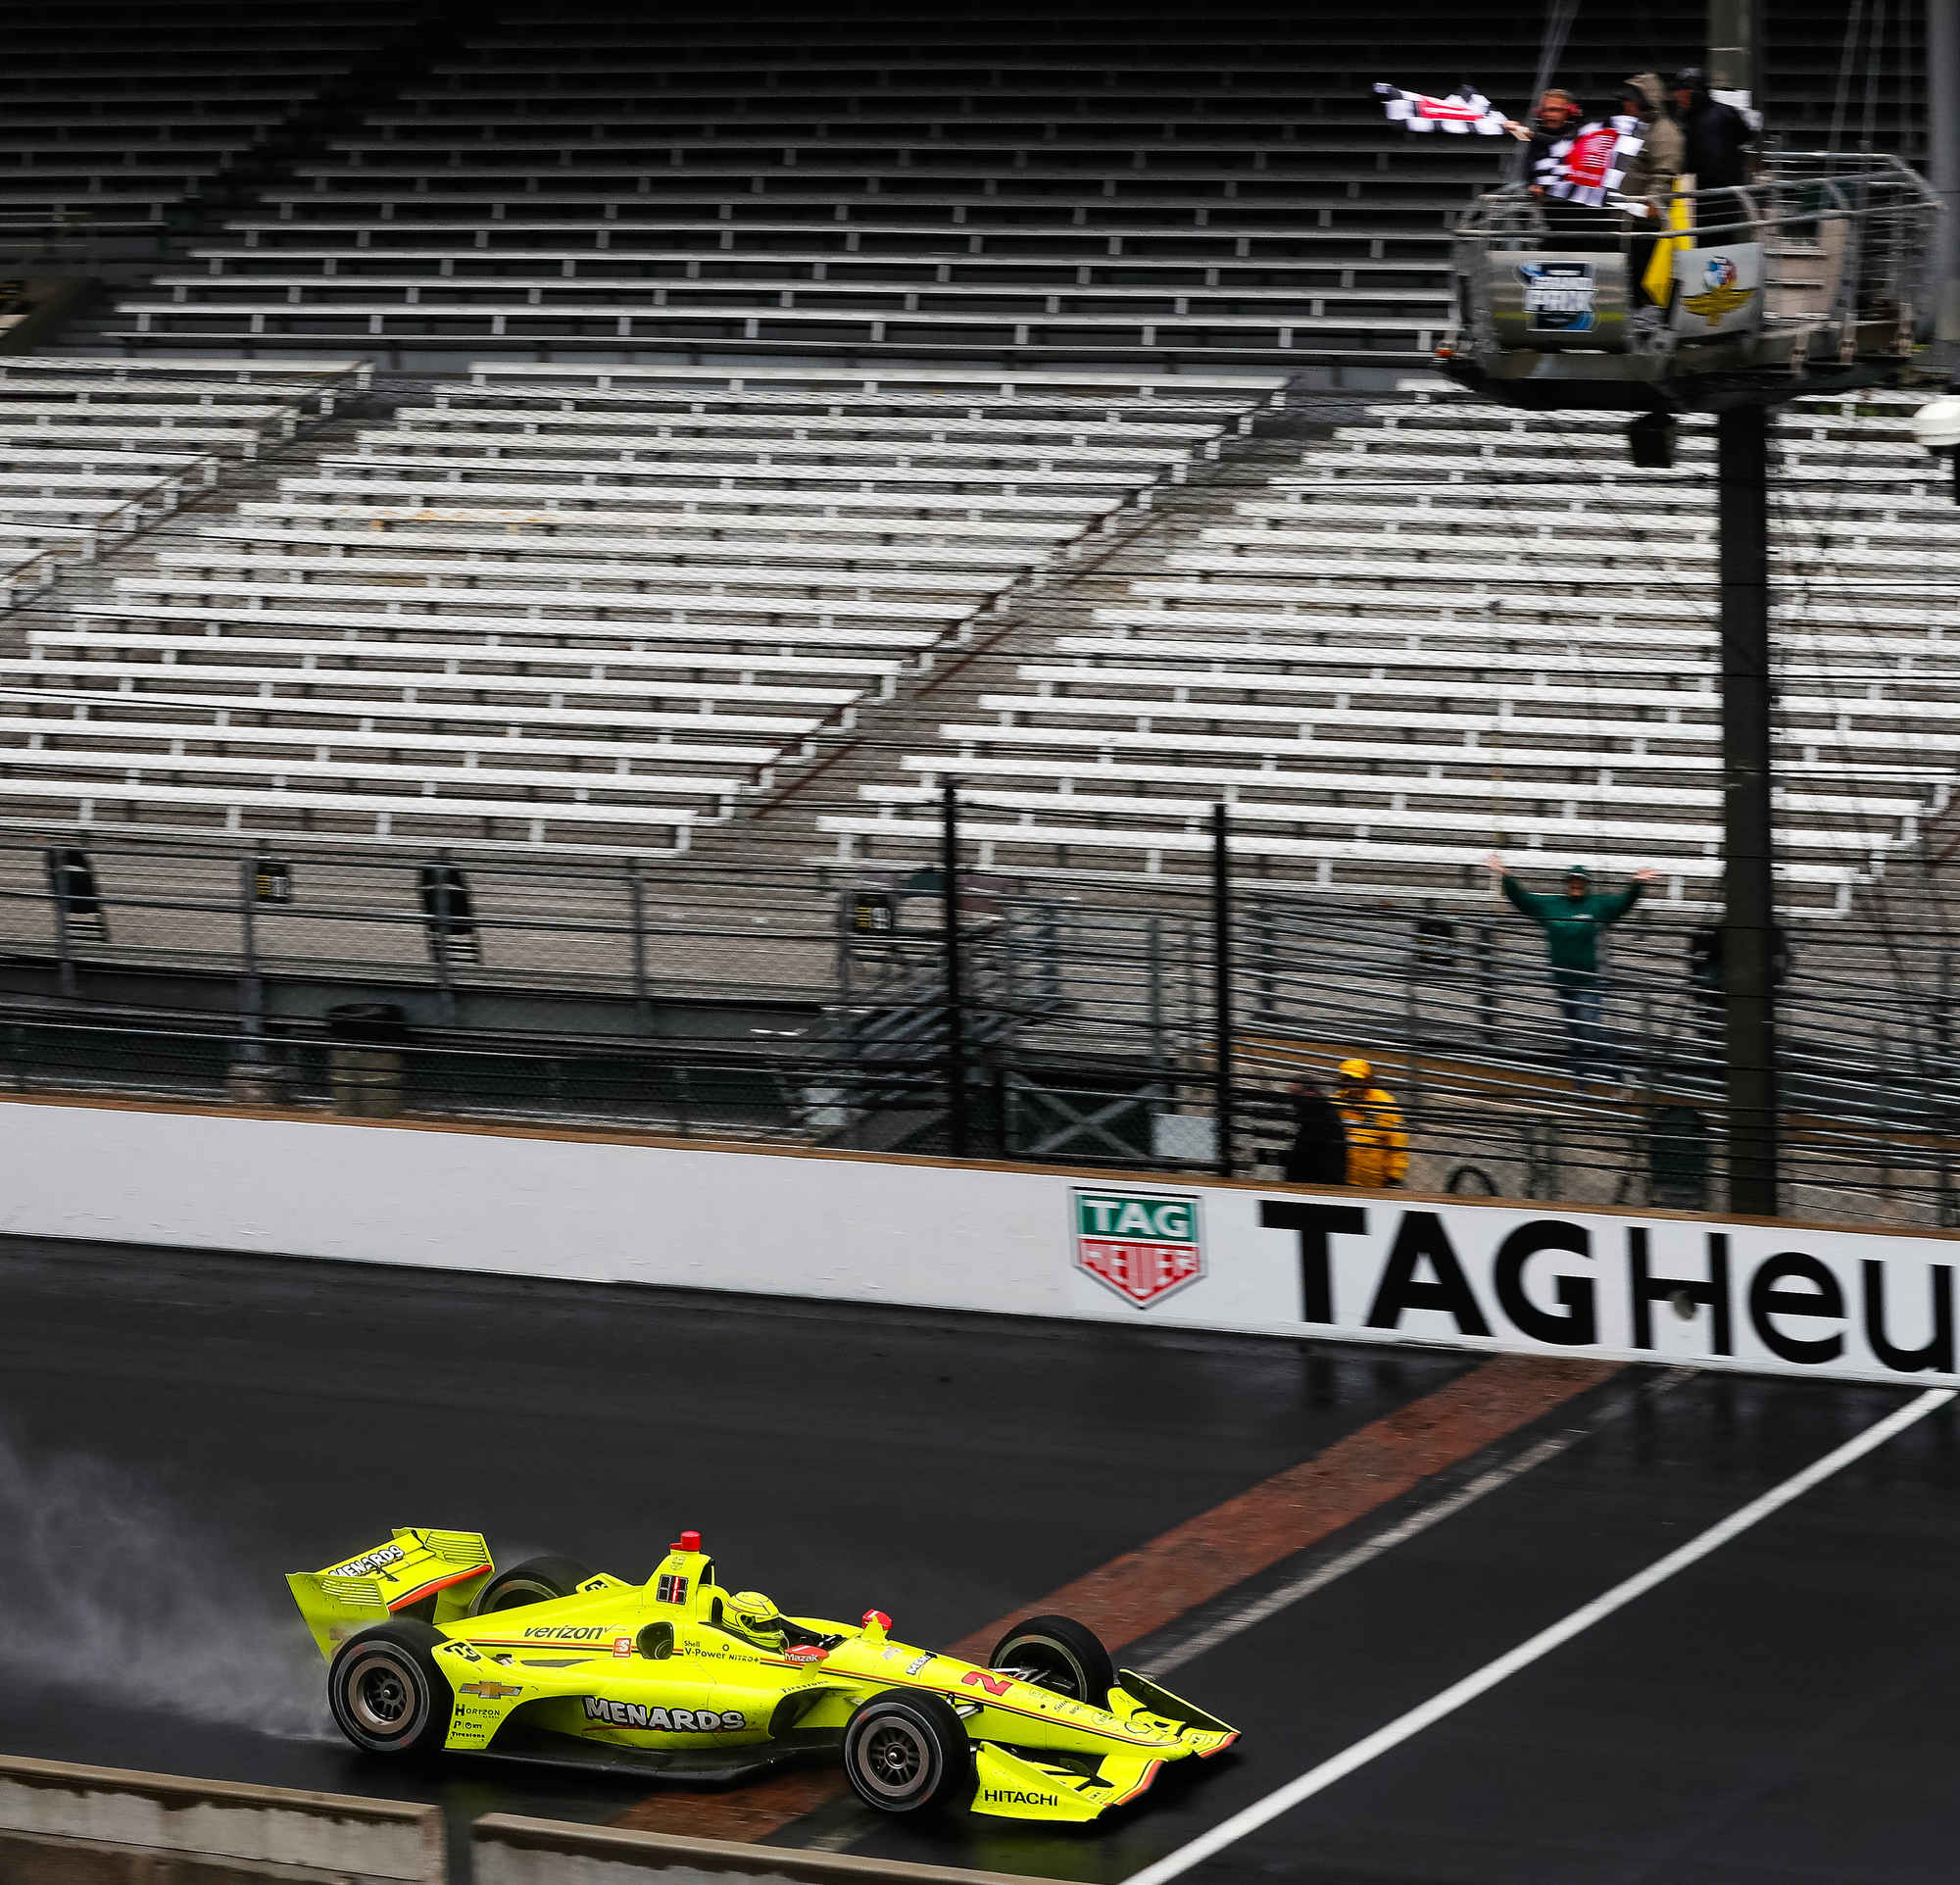 Pagenaud won in the wet last year